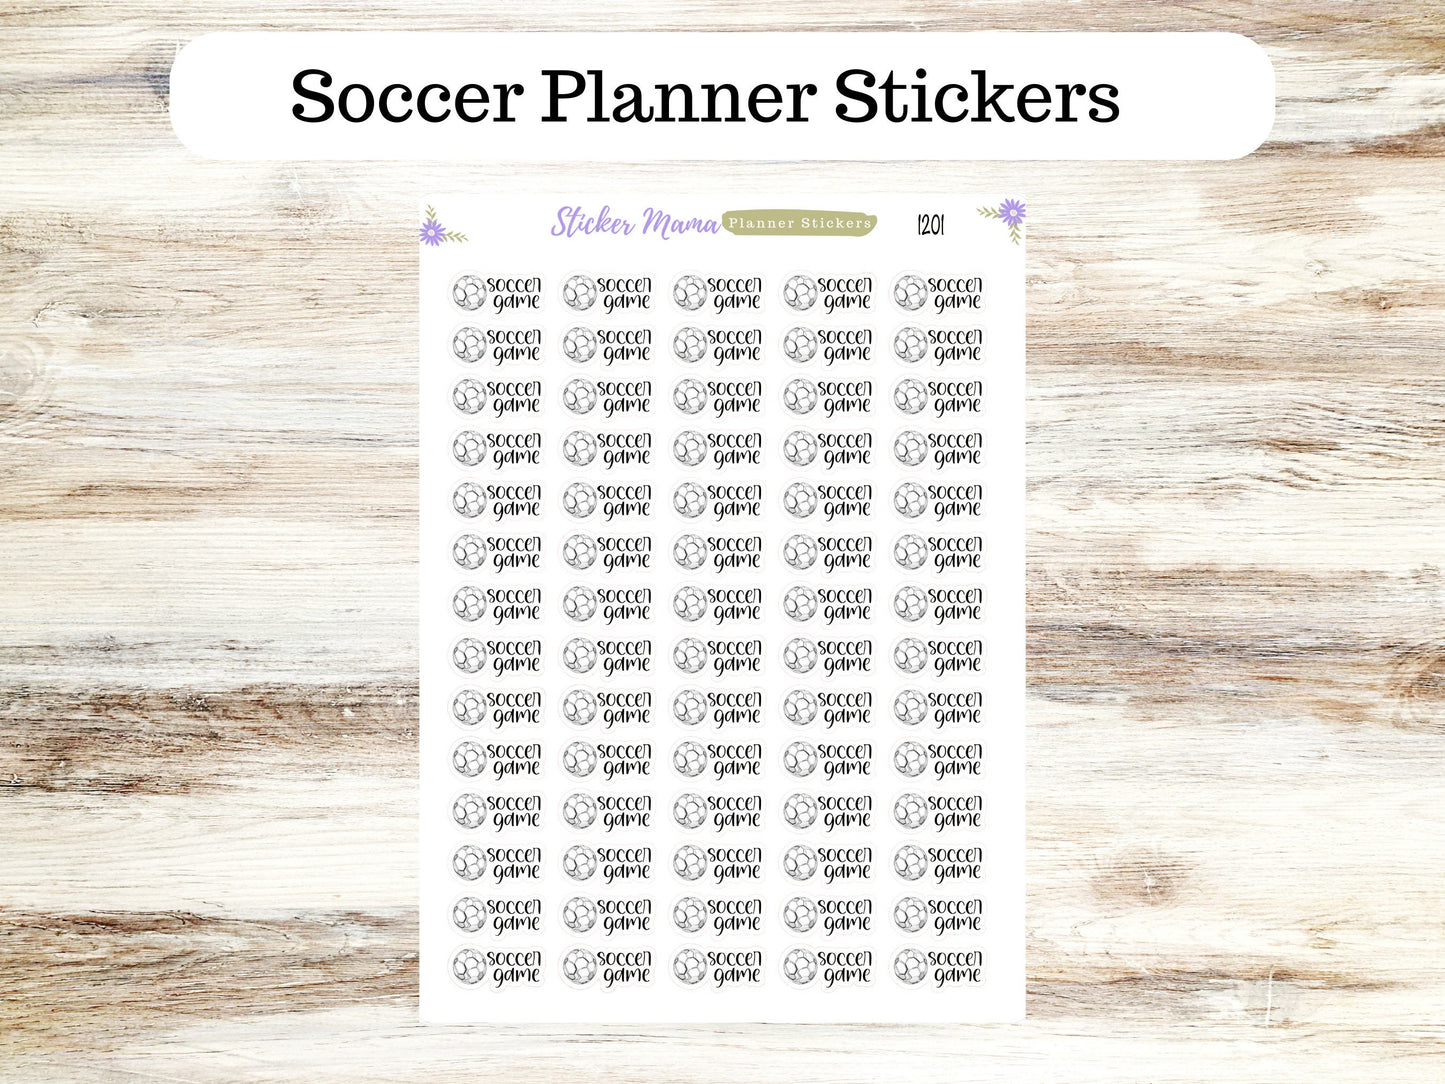 1201 SOCCER GAME STICKERS || Soccer Planner Stickers || Soccer Sports Stickers || Soccer Games || Soccer Practice